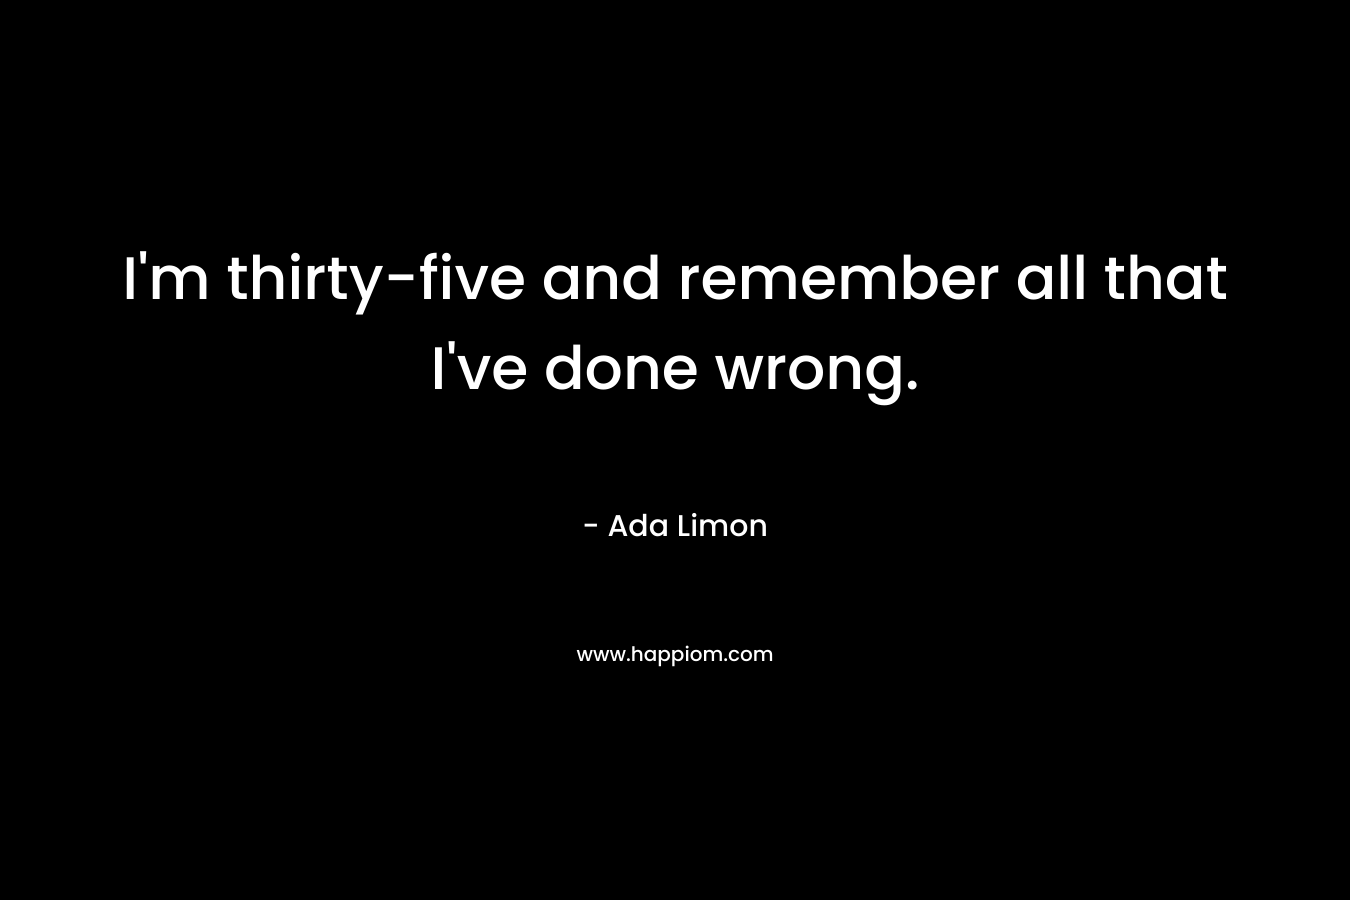 I’m thirty-five and remember all that I’ve done wrong. – Ada Limon